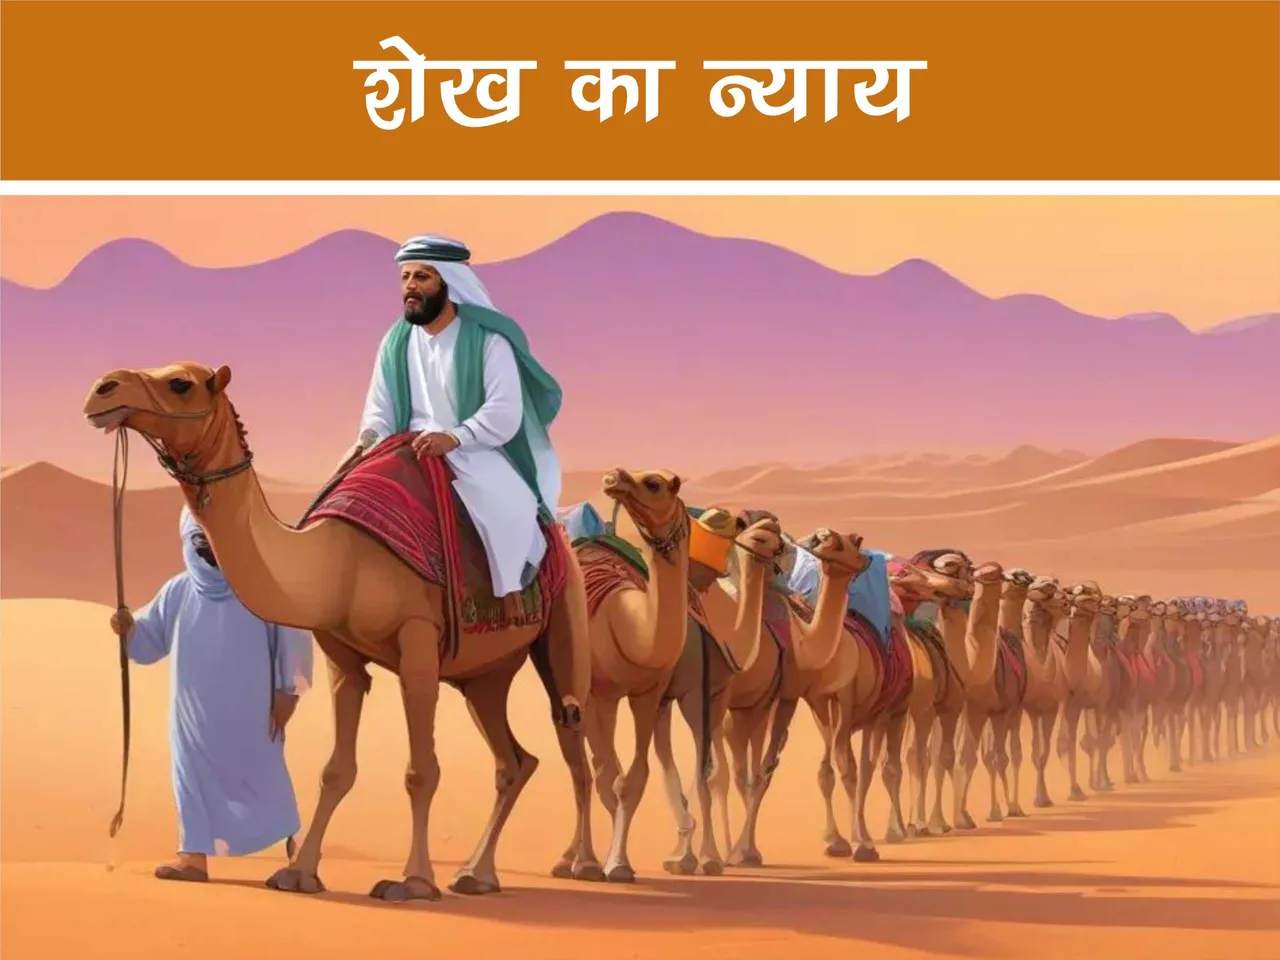 Cartoon image of sheikh travelling on camel in dessert